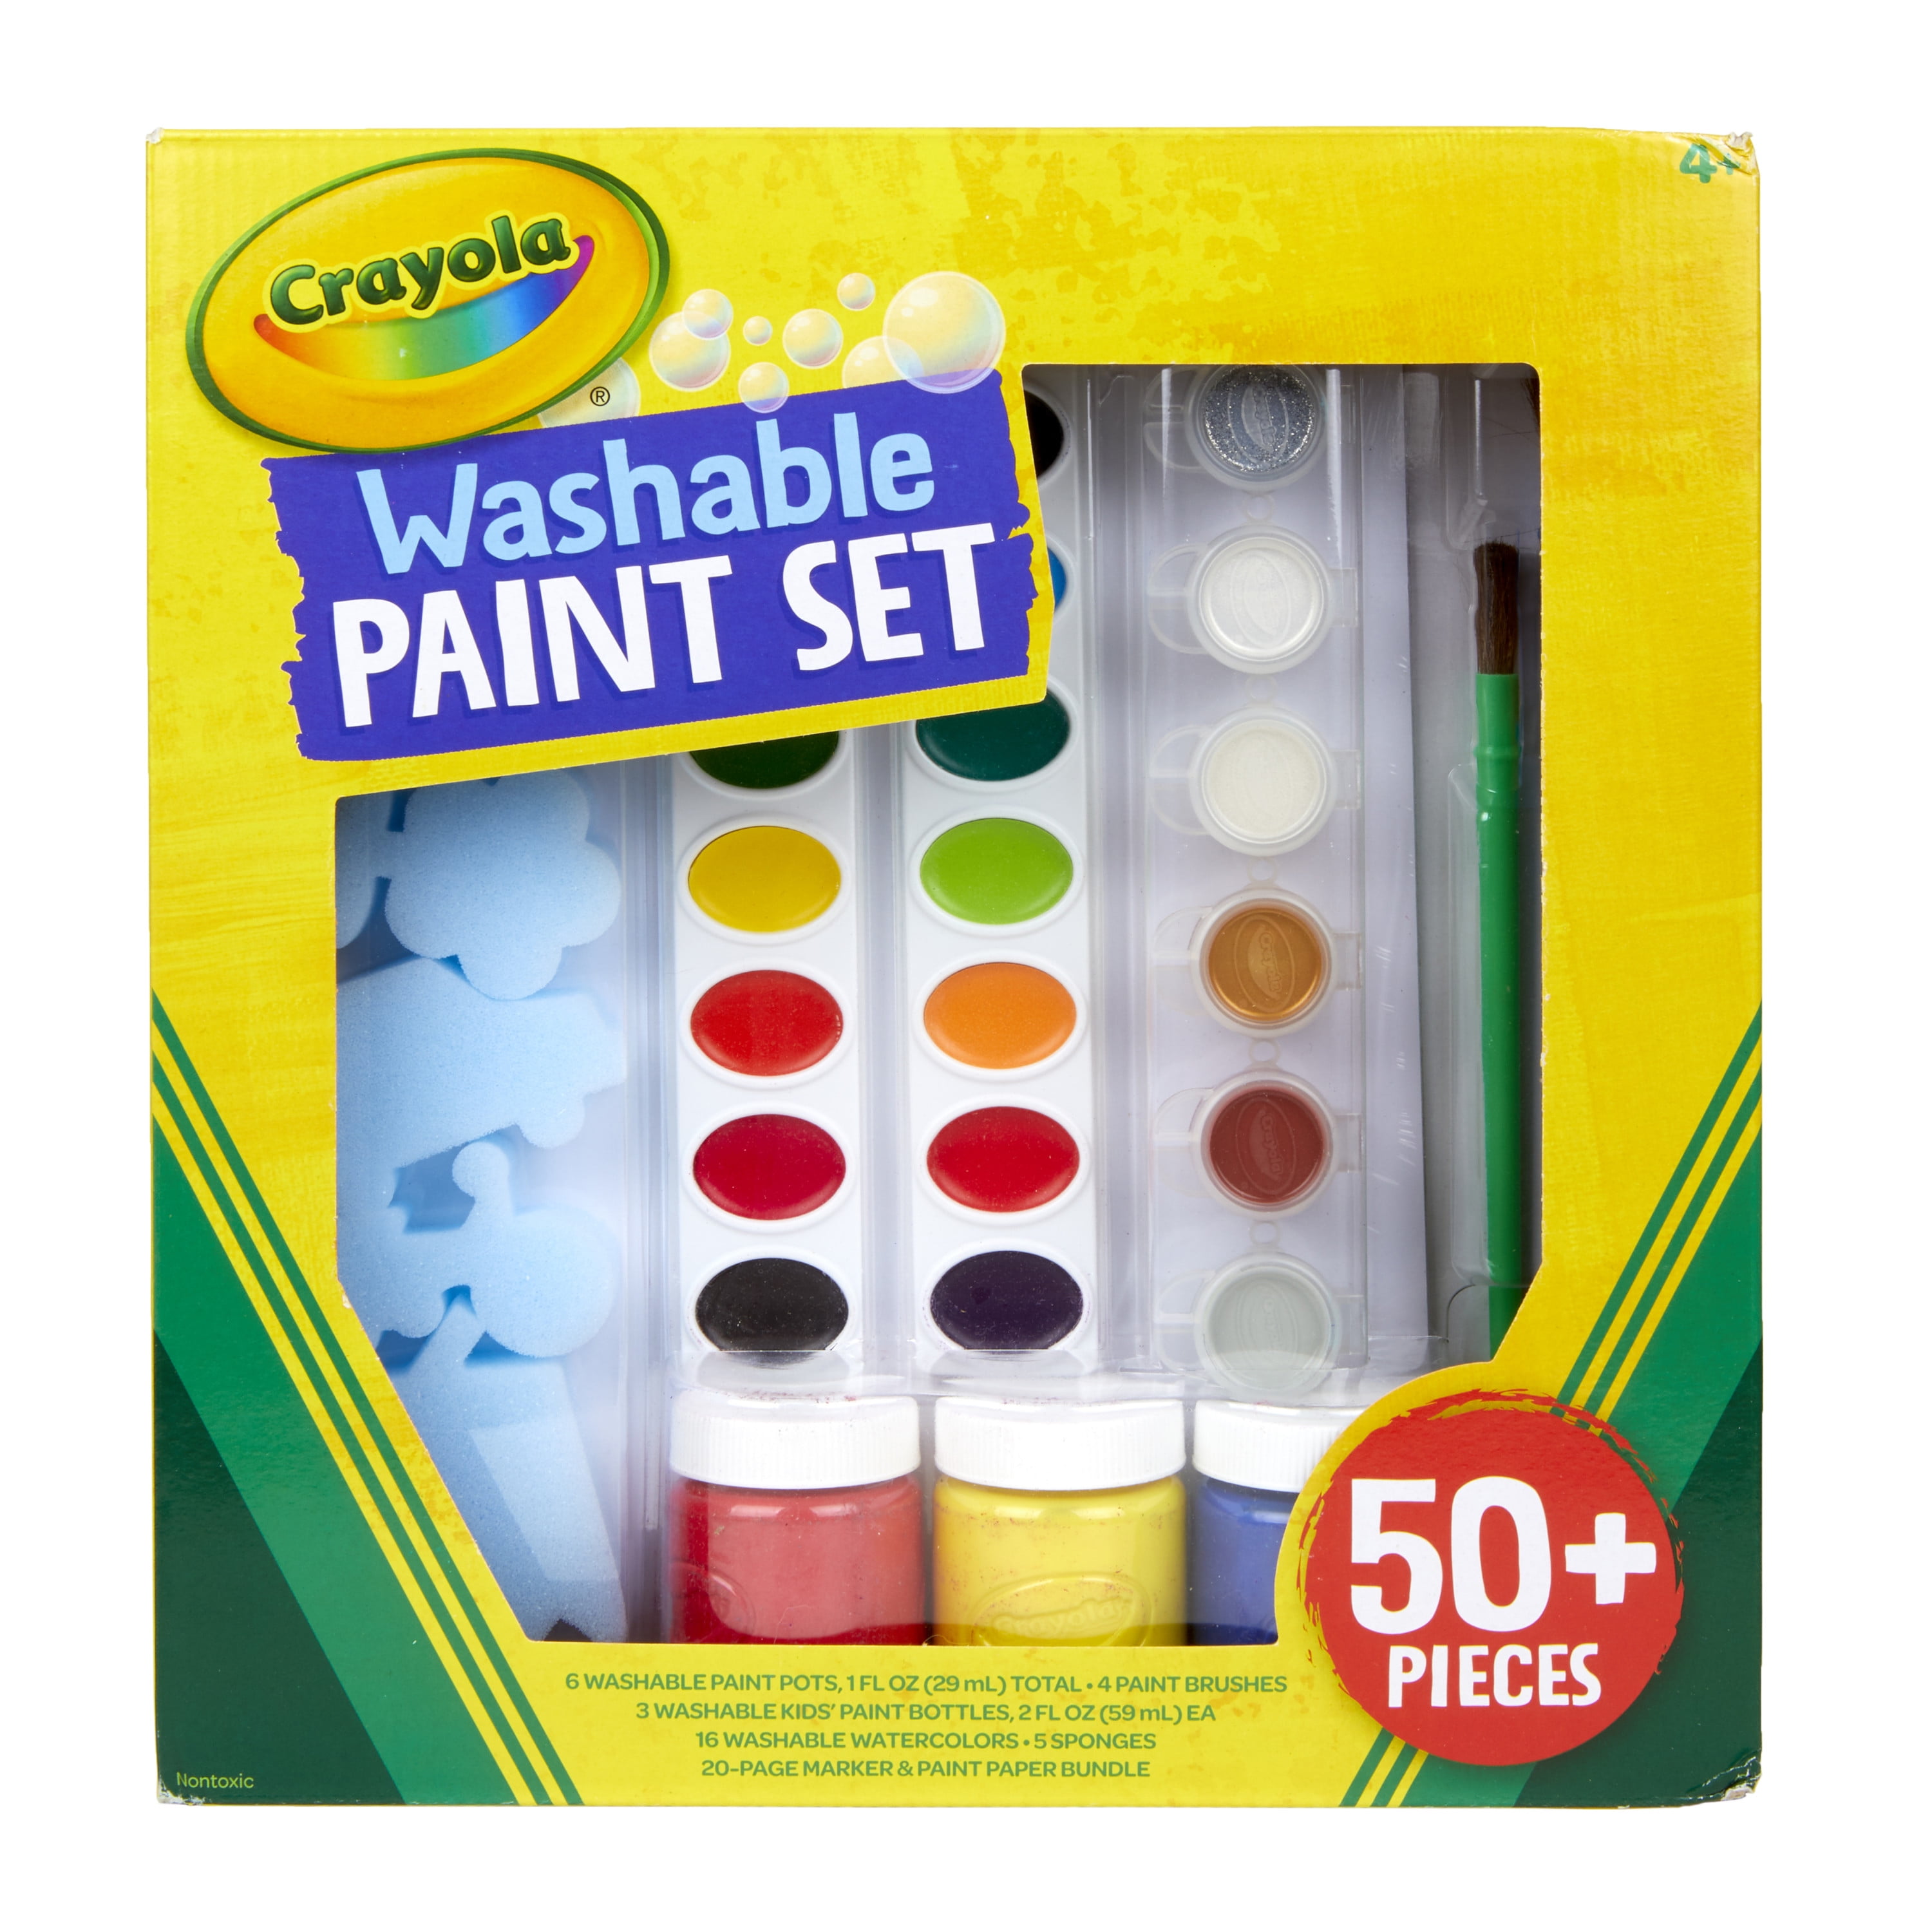 Complete Set of 30 Paint Brushes Bundle with 6 Crayola Washable Kids Paint